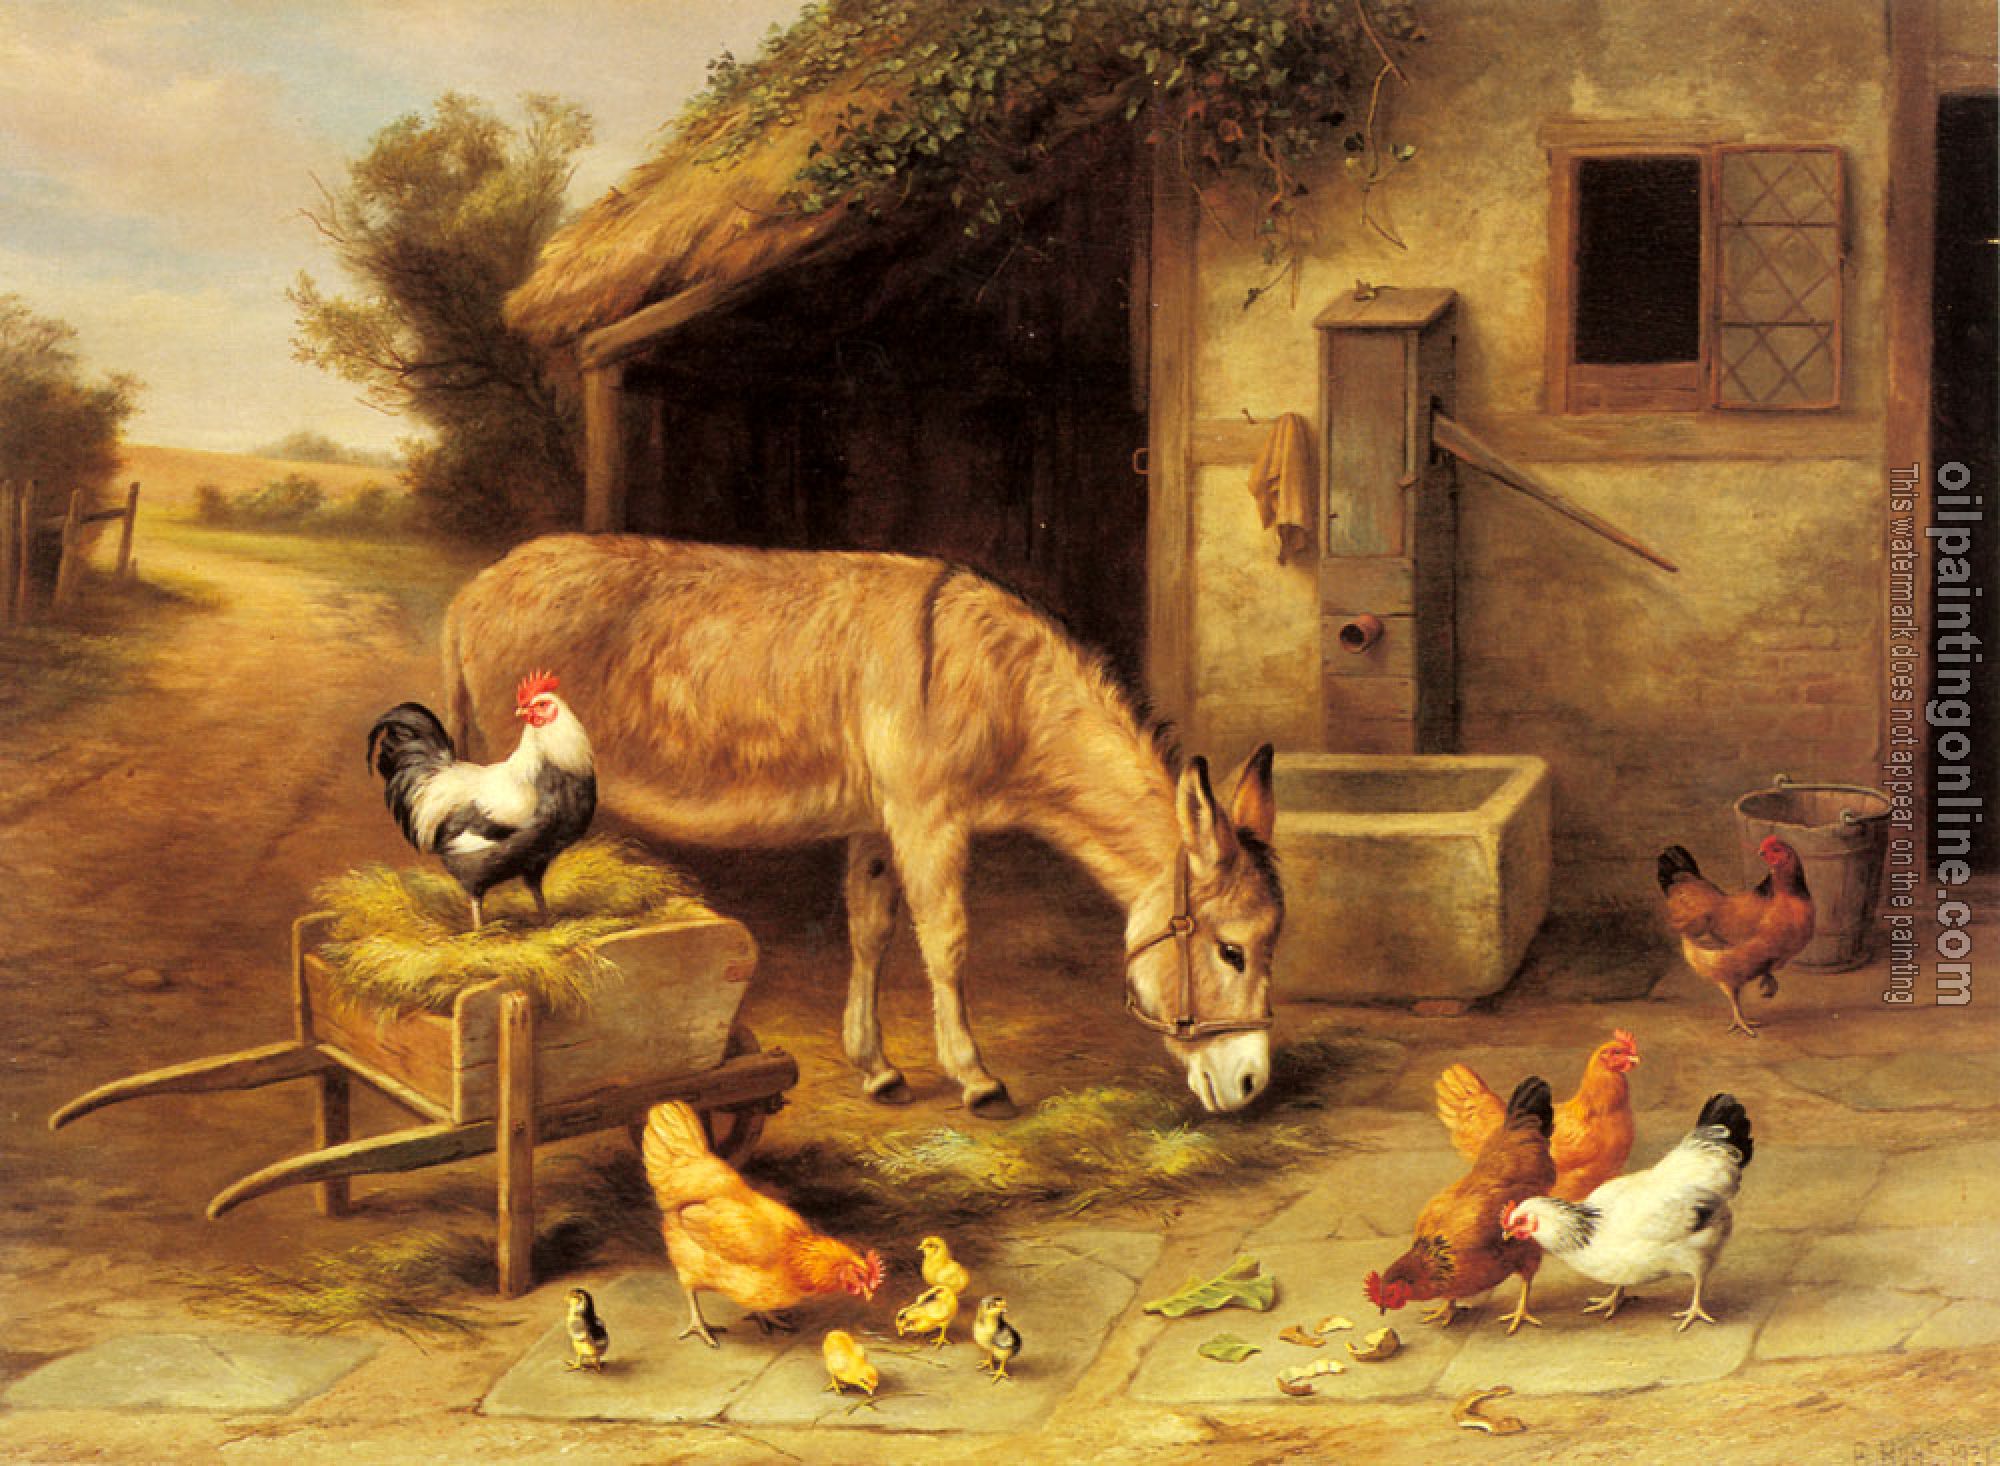 Edgar Hunt - A Donkey And Chickens Outside A Stable